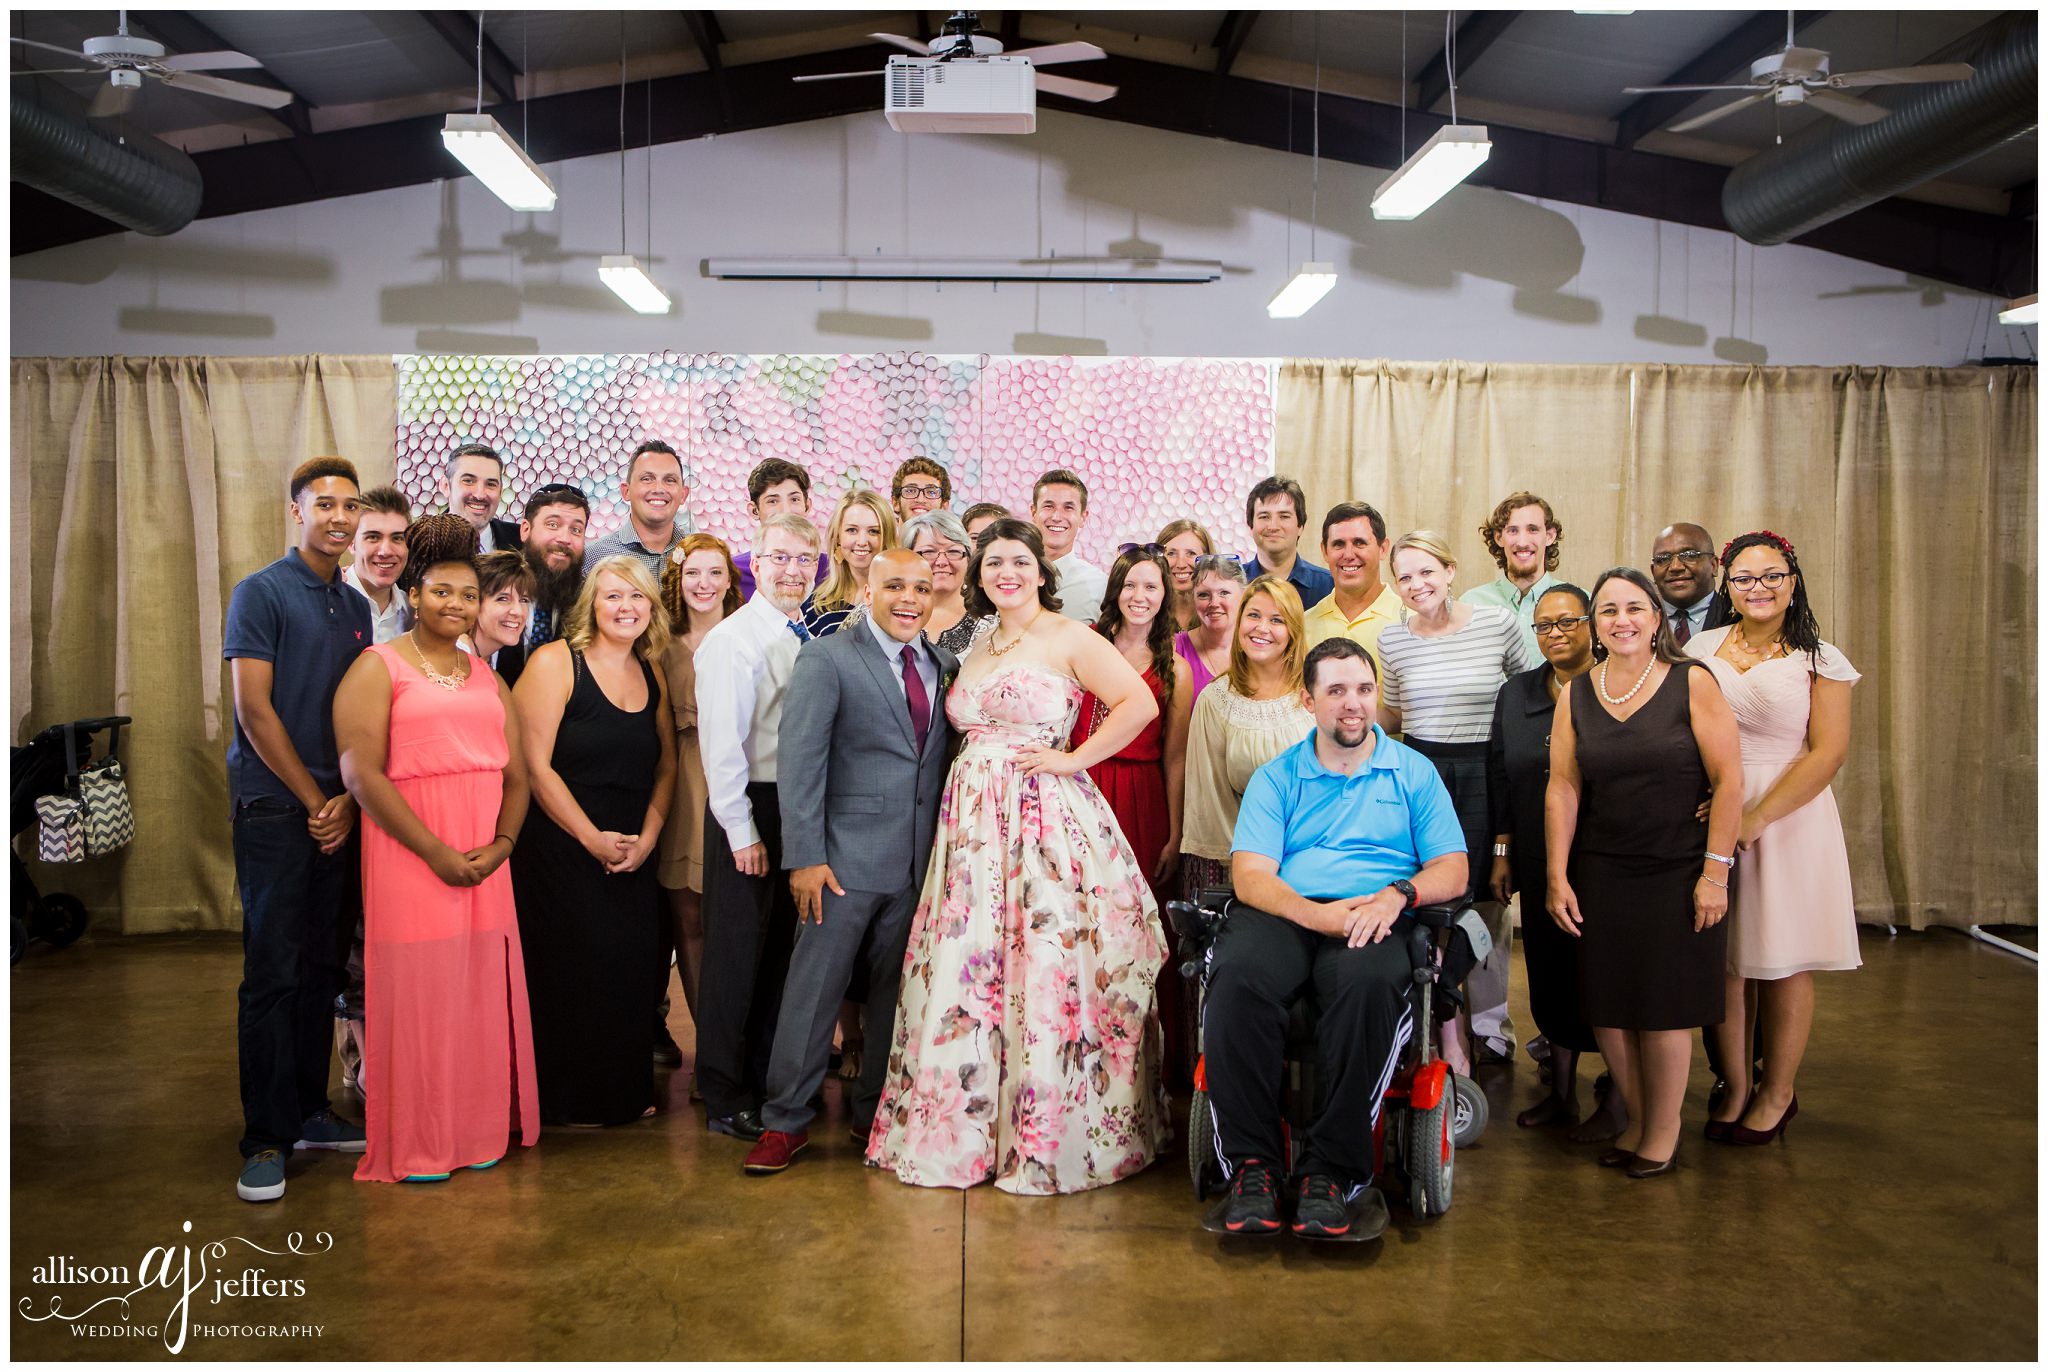 Kerrville Wedding Photographer Unique fun wedding with floral dress 0070